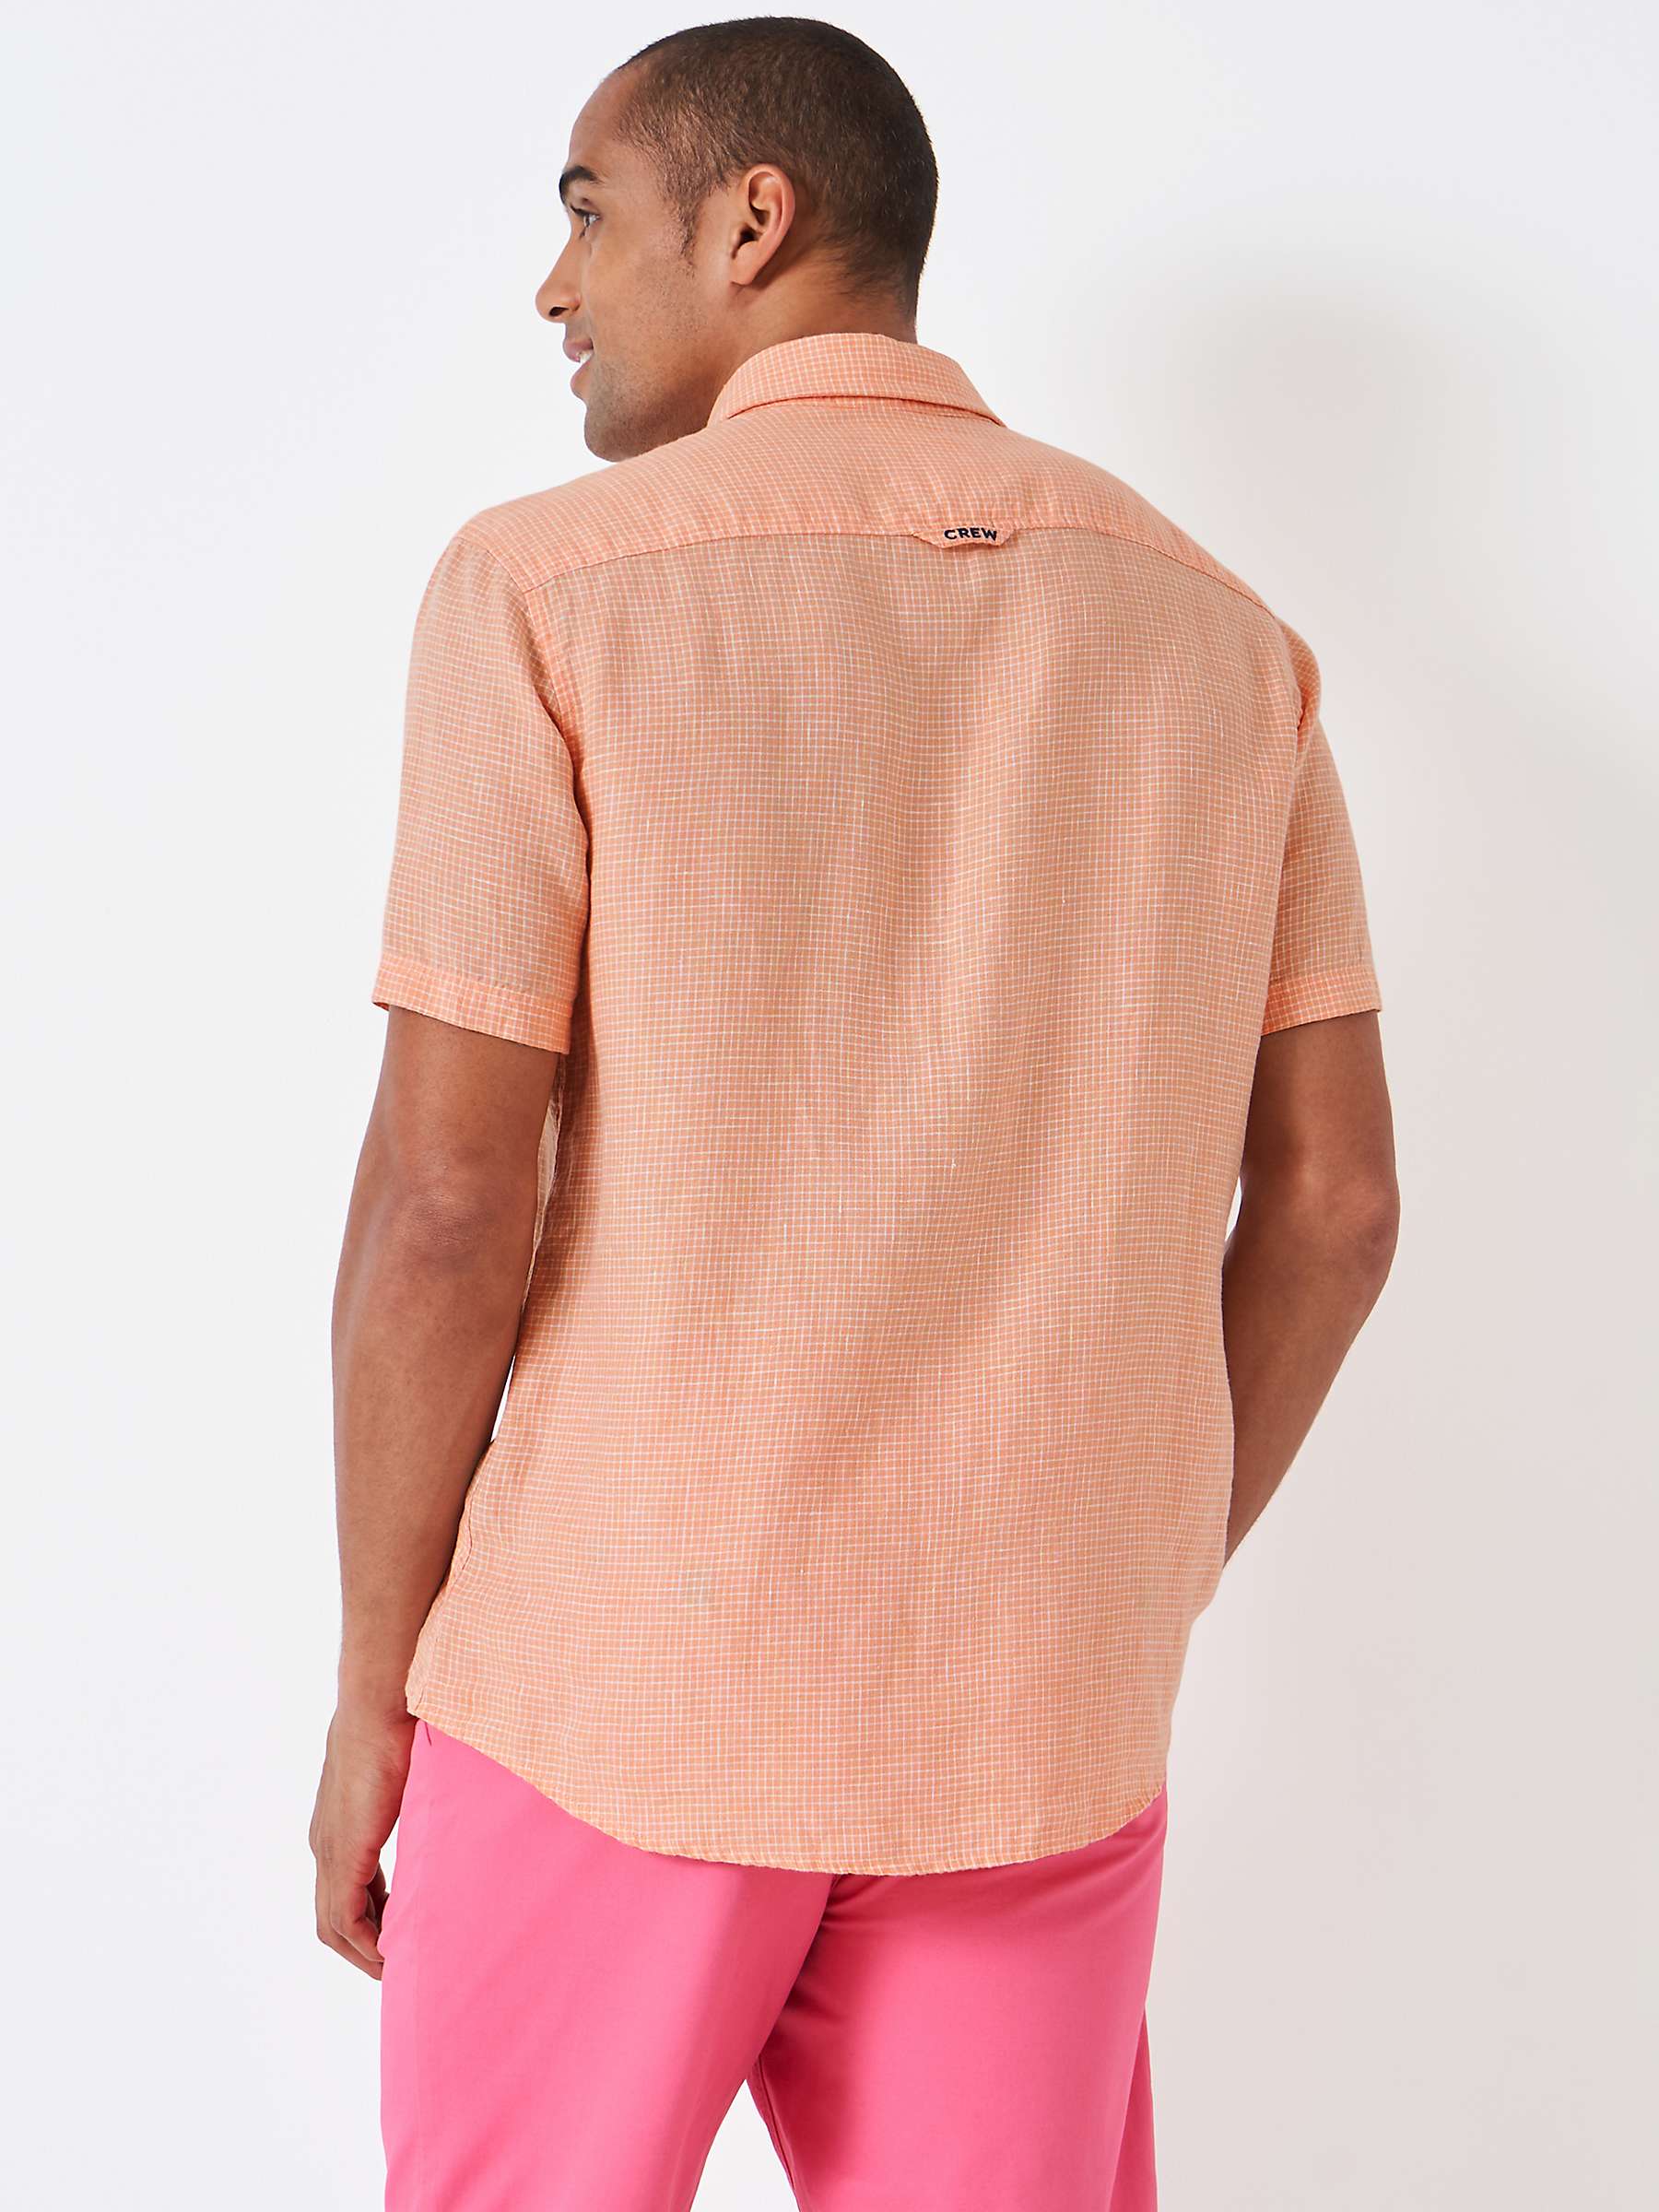 Buy Crew Clothing Check Linen Short Sleeve Shirt, Coral Online at johnlewis.com